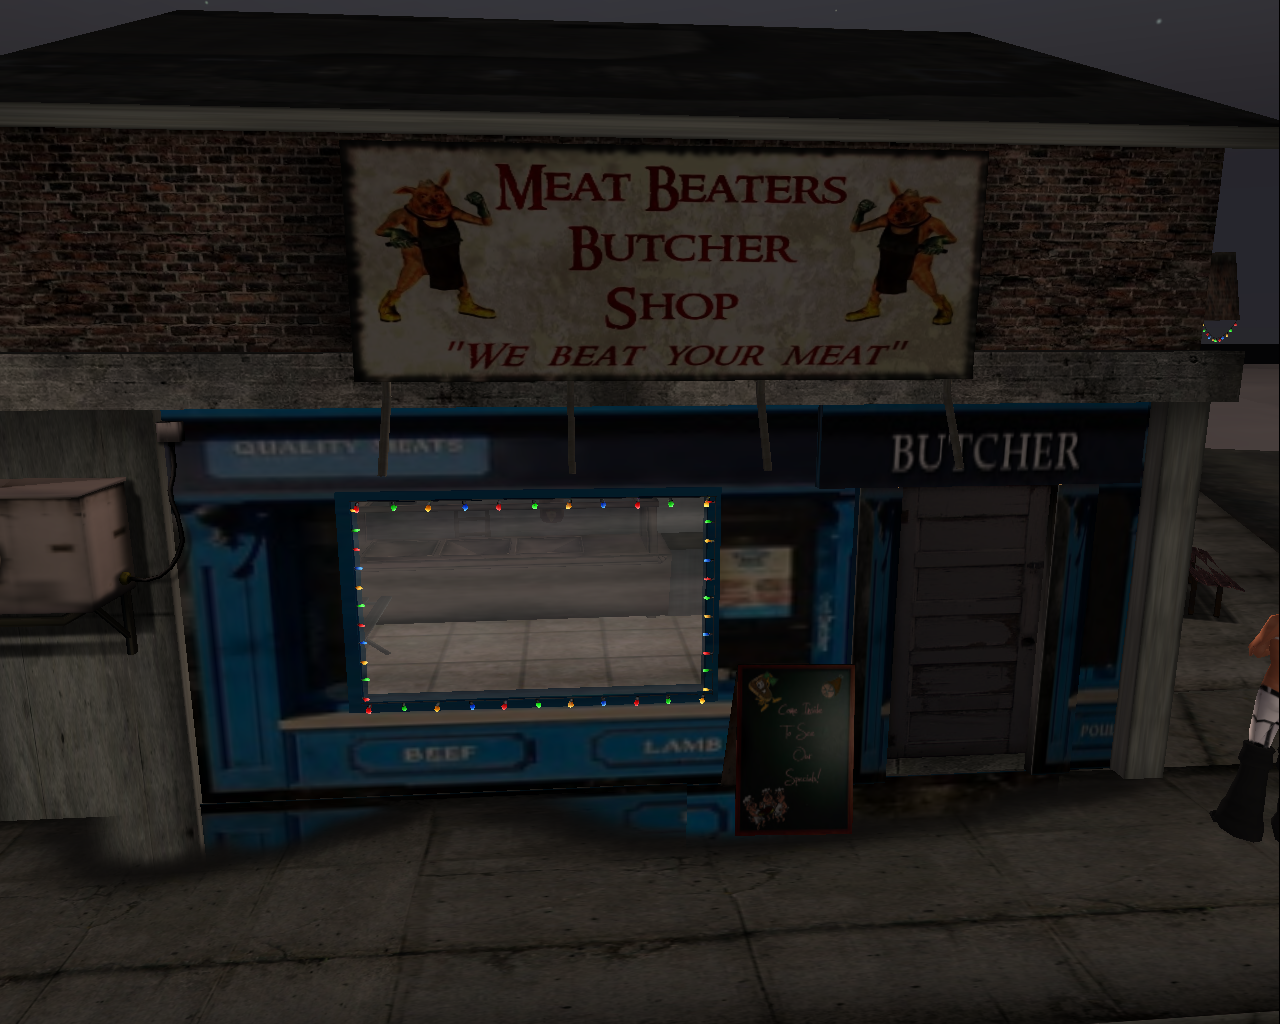 Meat Beaters Butcher Shop